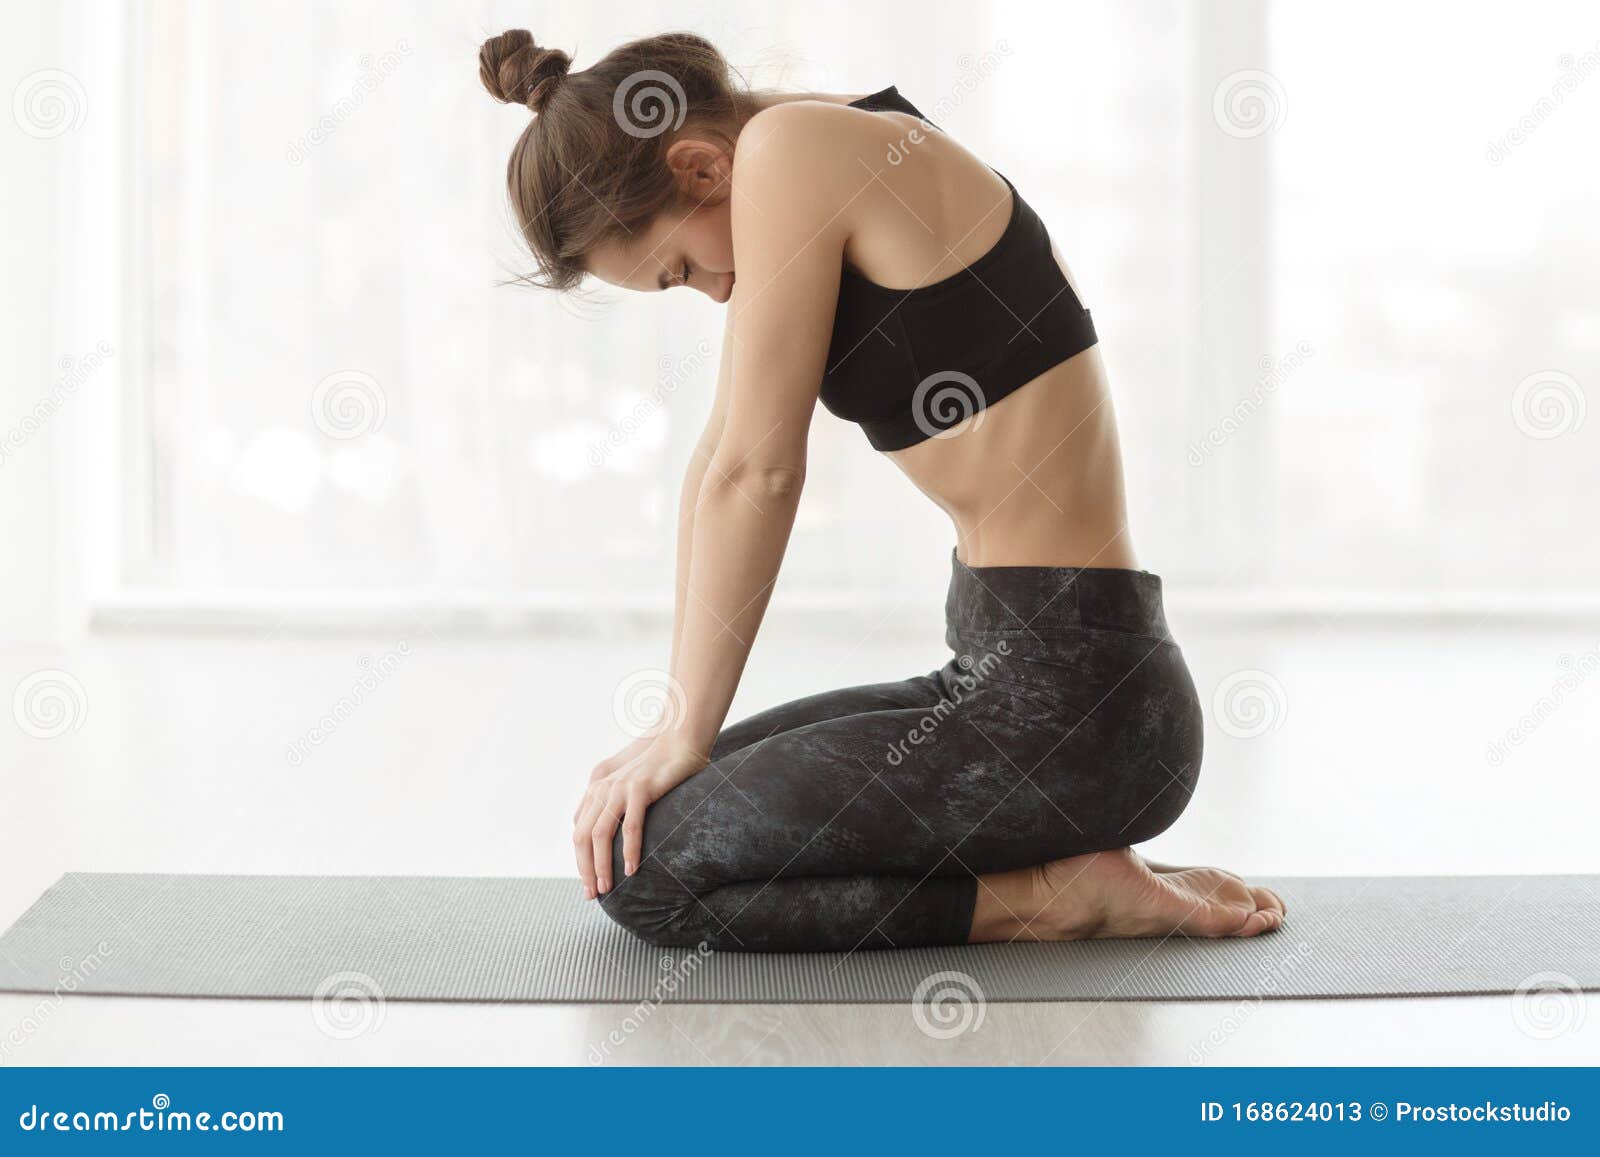 A Woman Makes a Stomach Vacuum. Stock Image - Image of isolated, female:  145570615